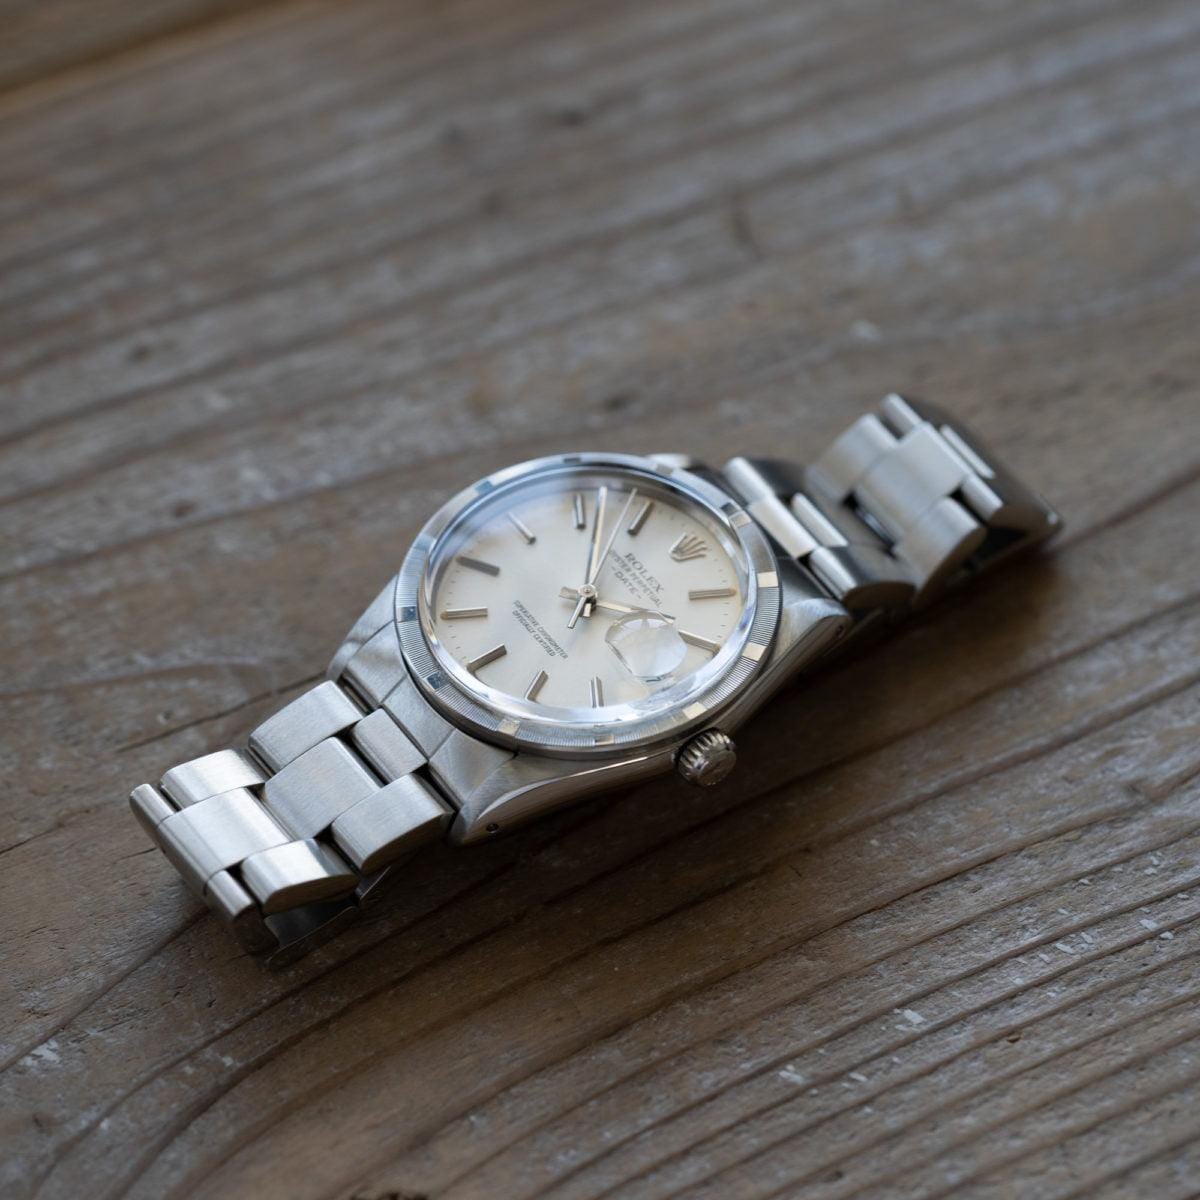 ROLEX Oyster Perpetual Date 15010 Ivory Dial 1980s - Arbitro